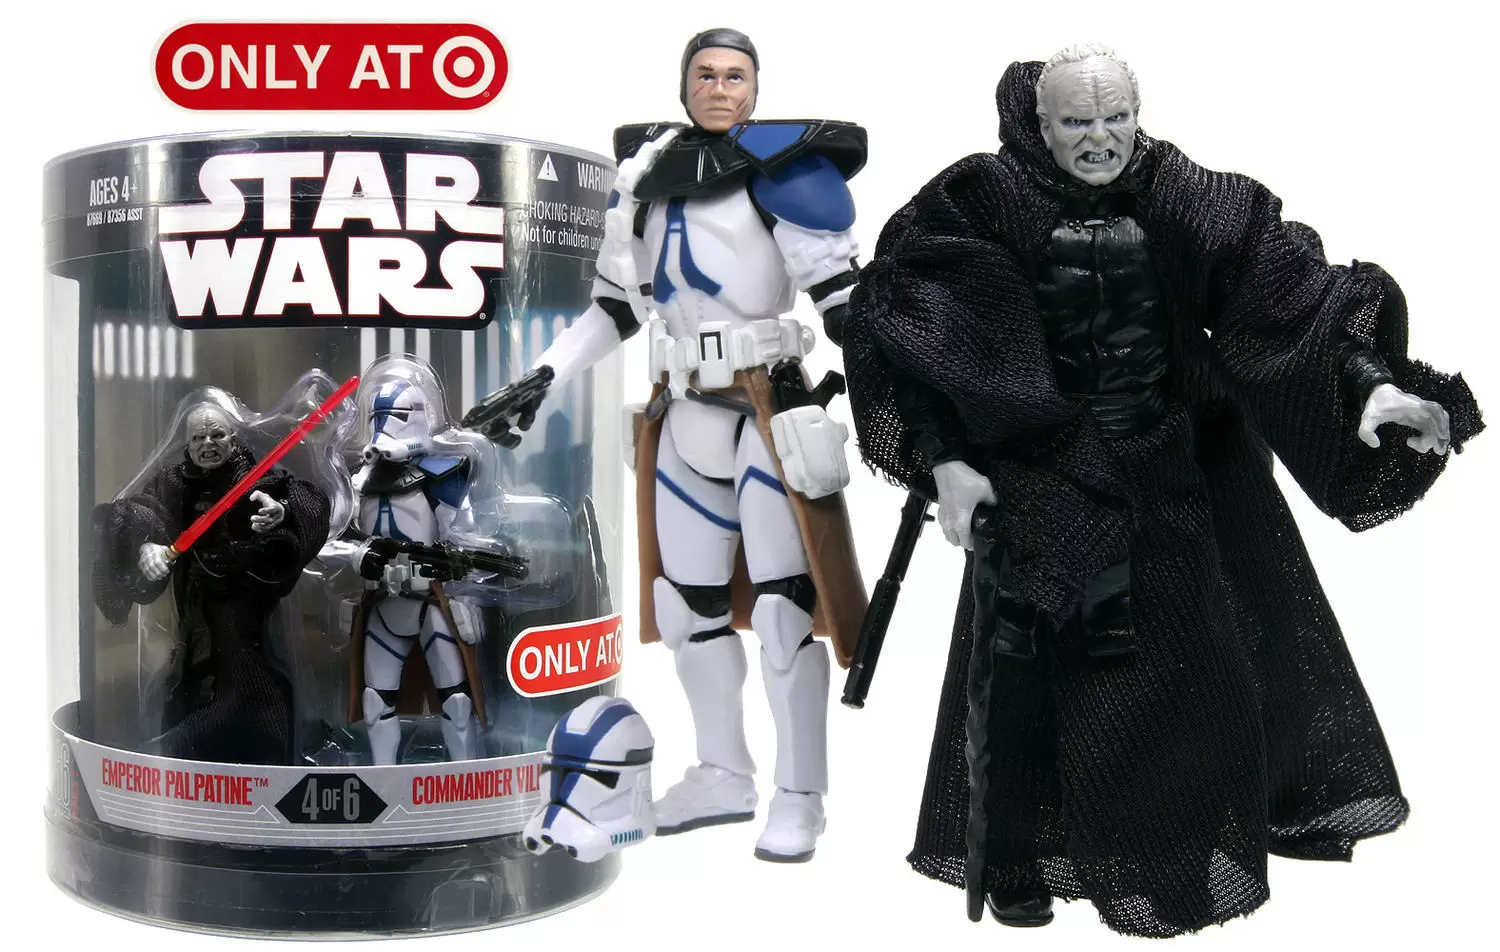 30th Anniversary Collection (TAC) - Order 66 - Emperor Palpatine & Commander Vill